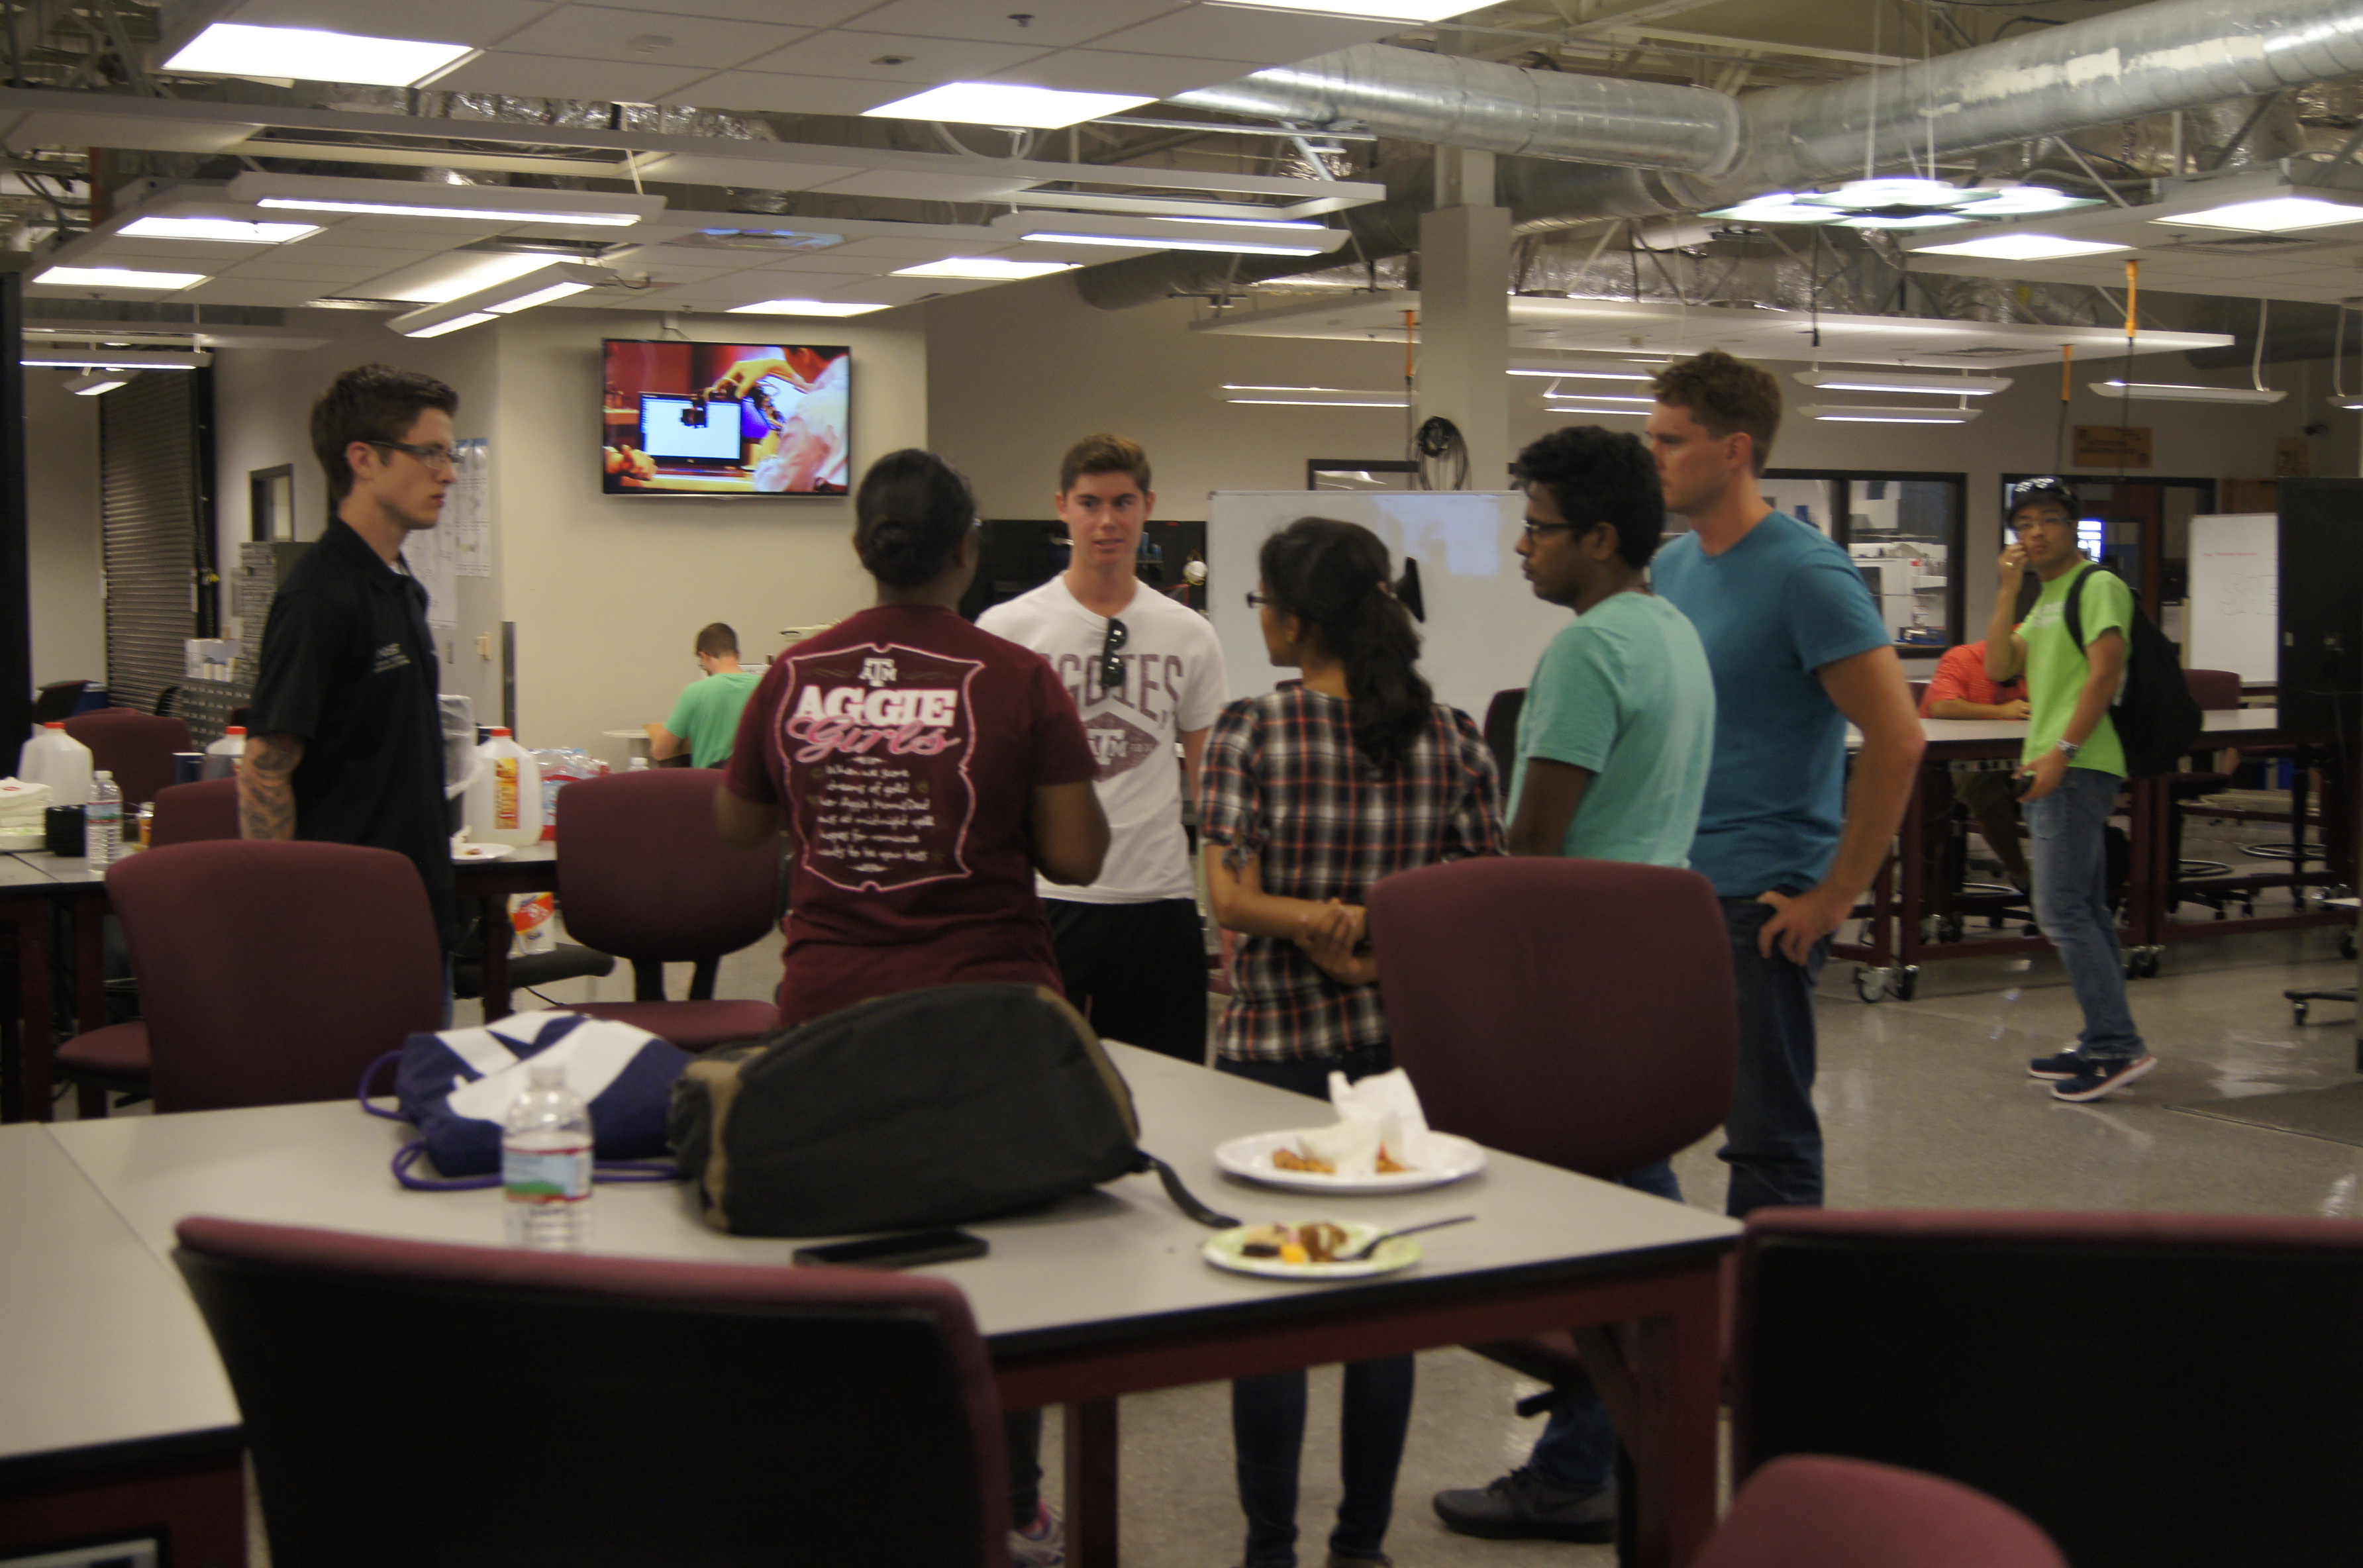 Texas A&M Engineering Students collaborating on Marlin their XPRIZE submission